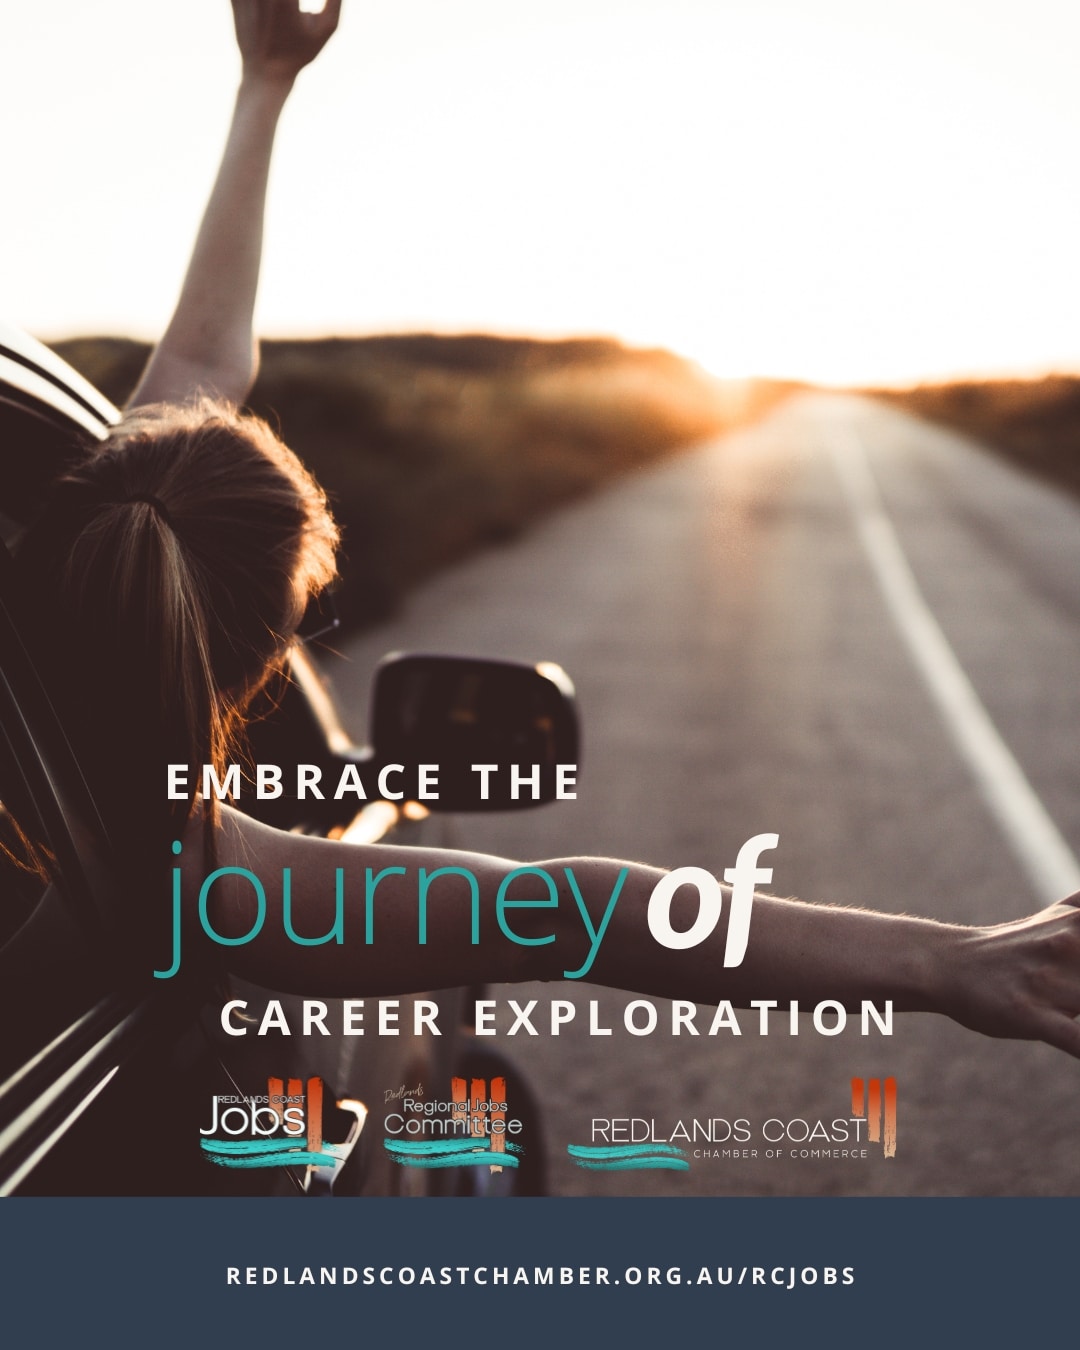 Embrace the journey of career